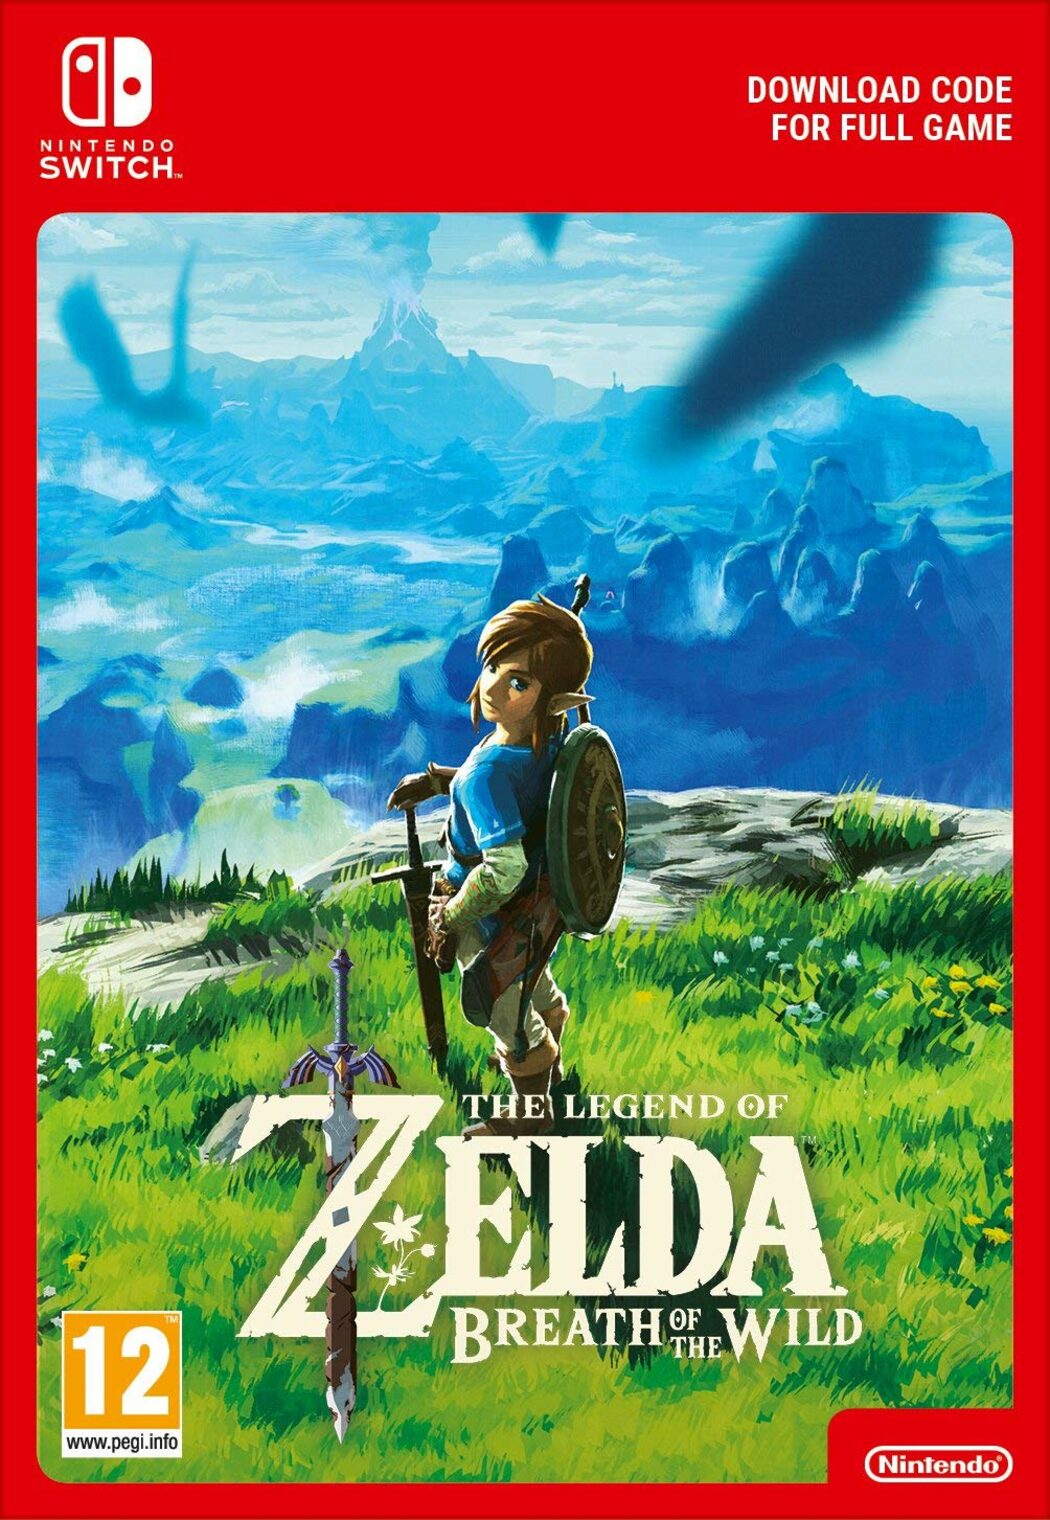 The Legend of Zelda™: Breath of the Wild on Nintendo Switch – United States  Dollar